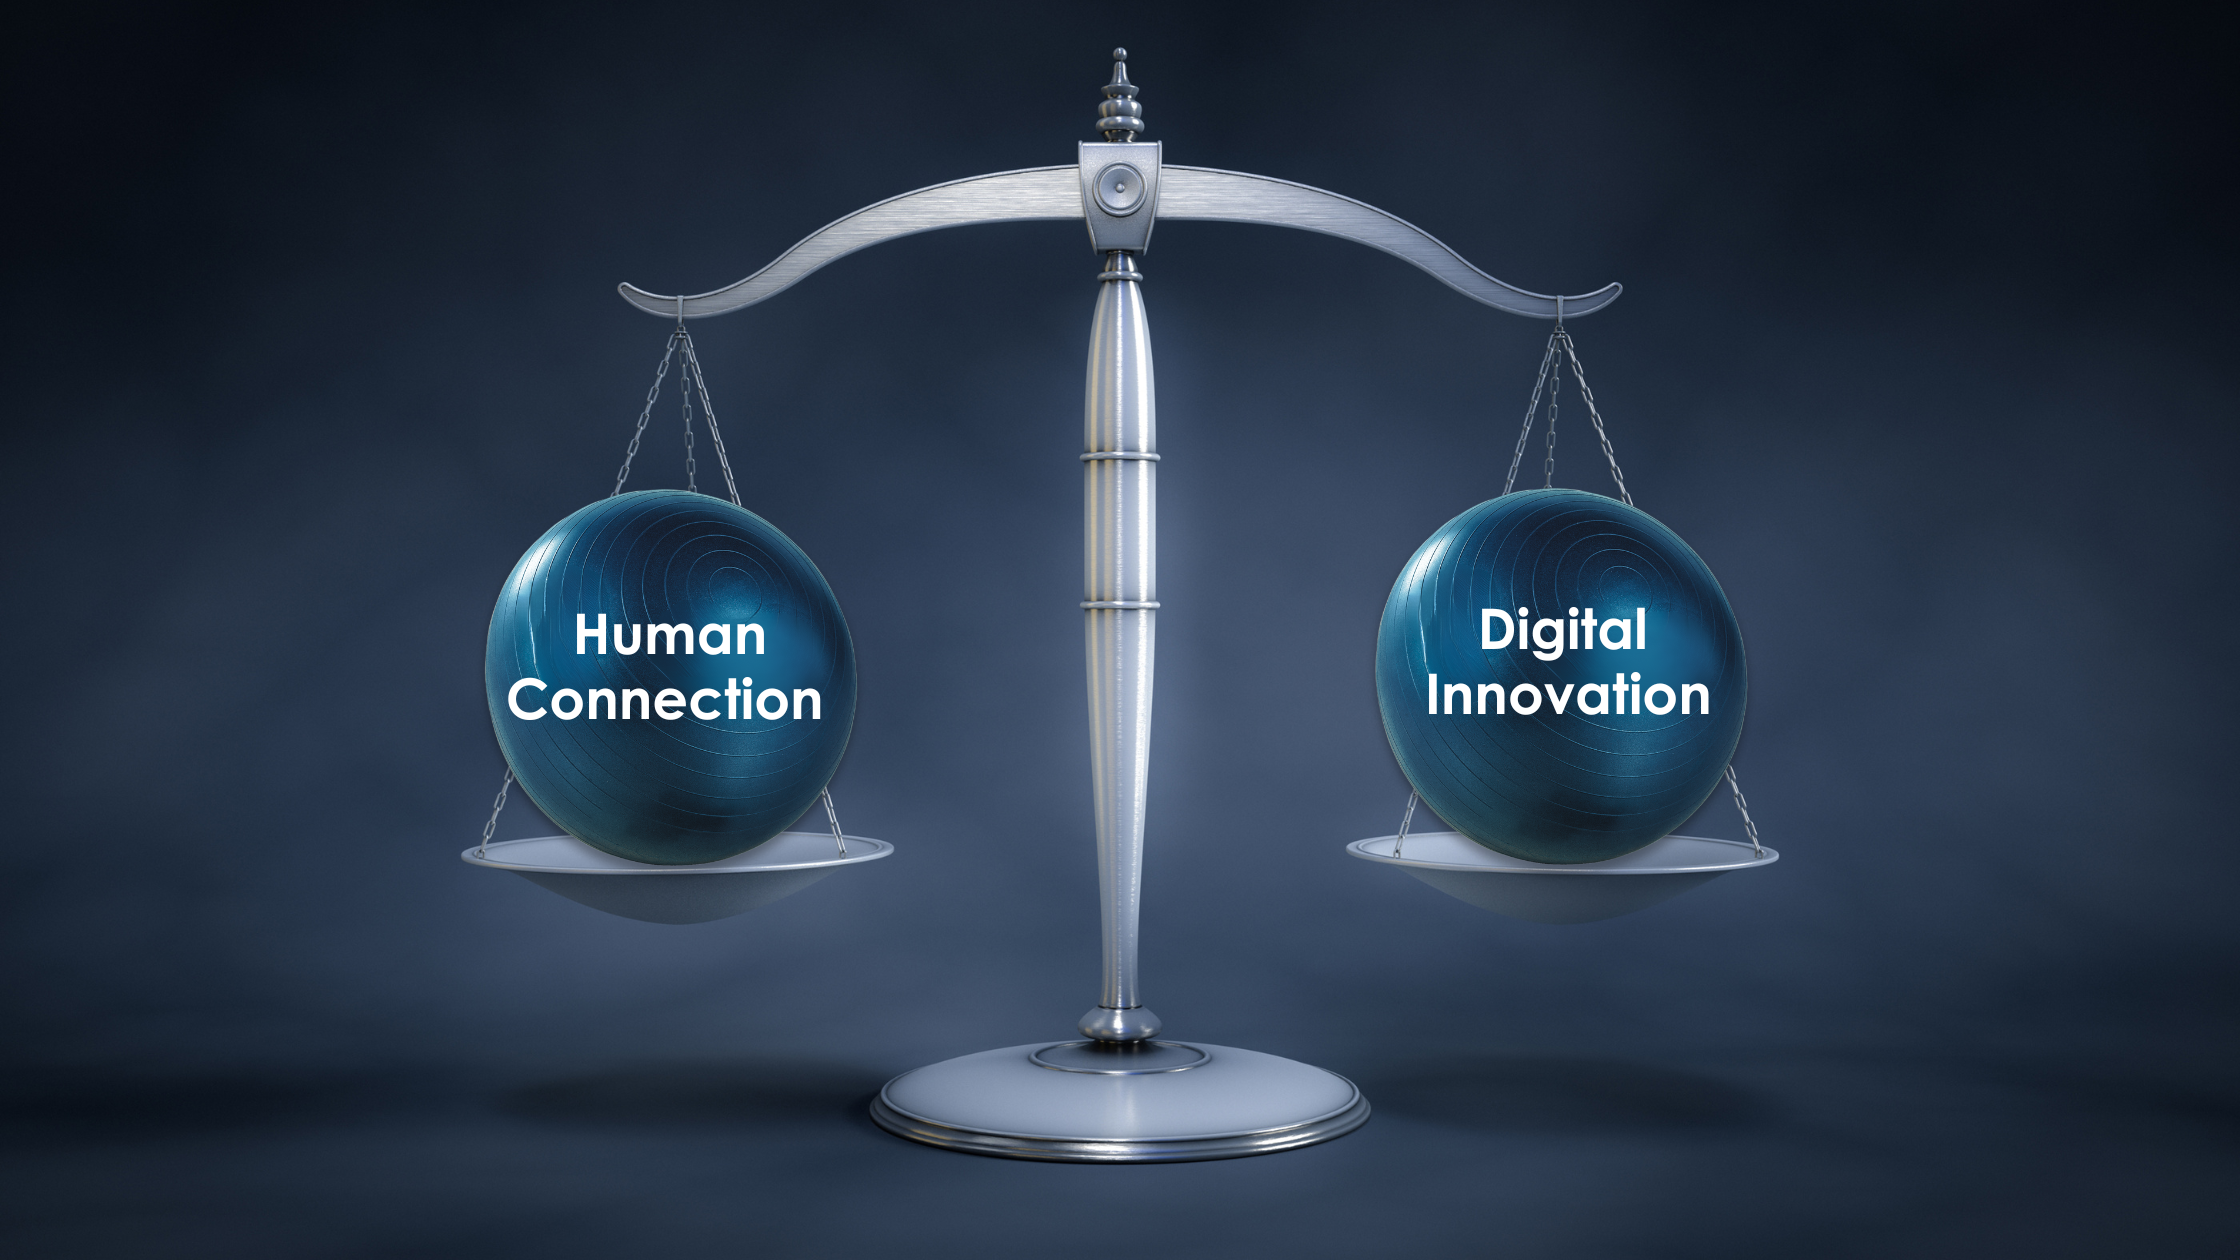 Balancing Human Connection with Digital Innovation: How to Deliver a Better Customer Experience